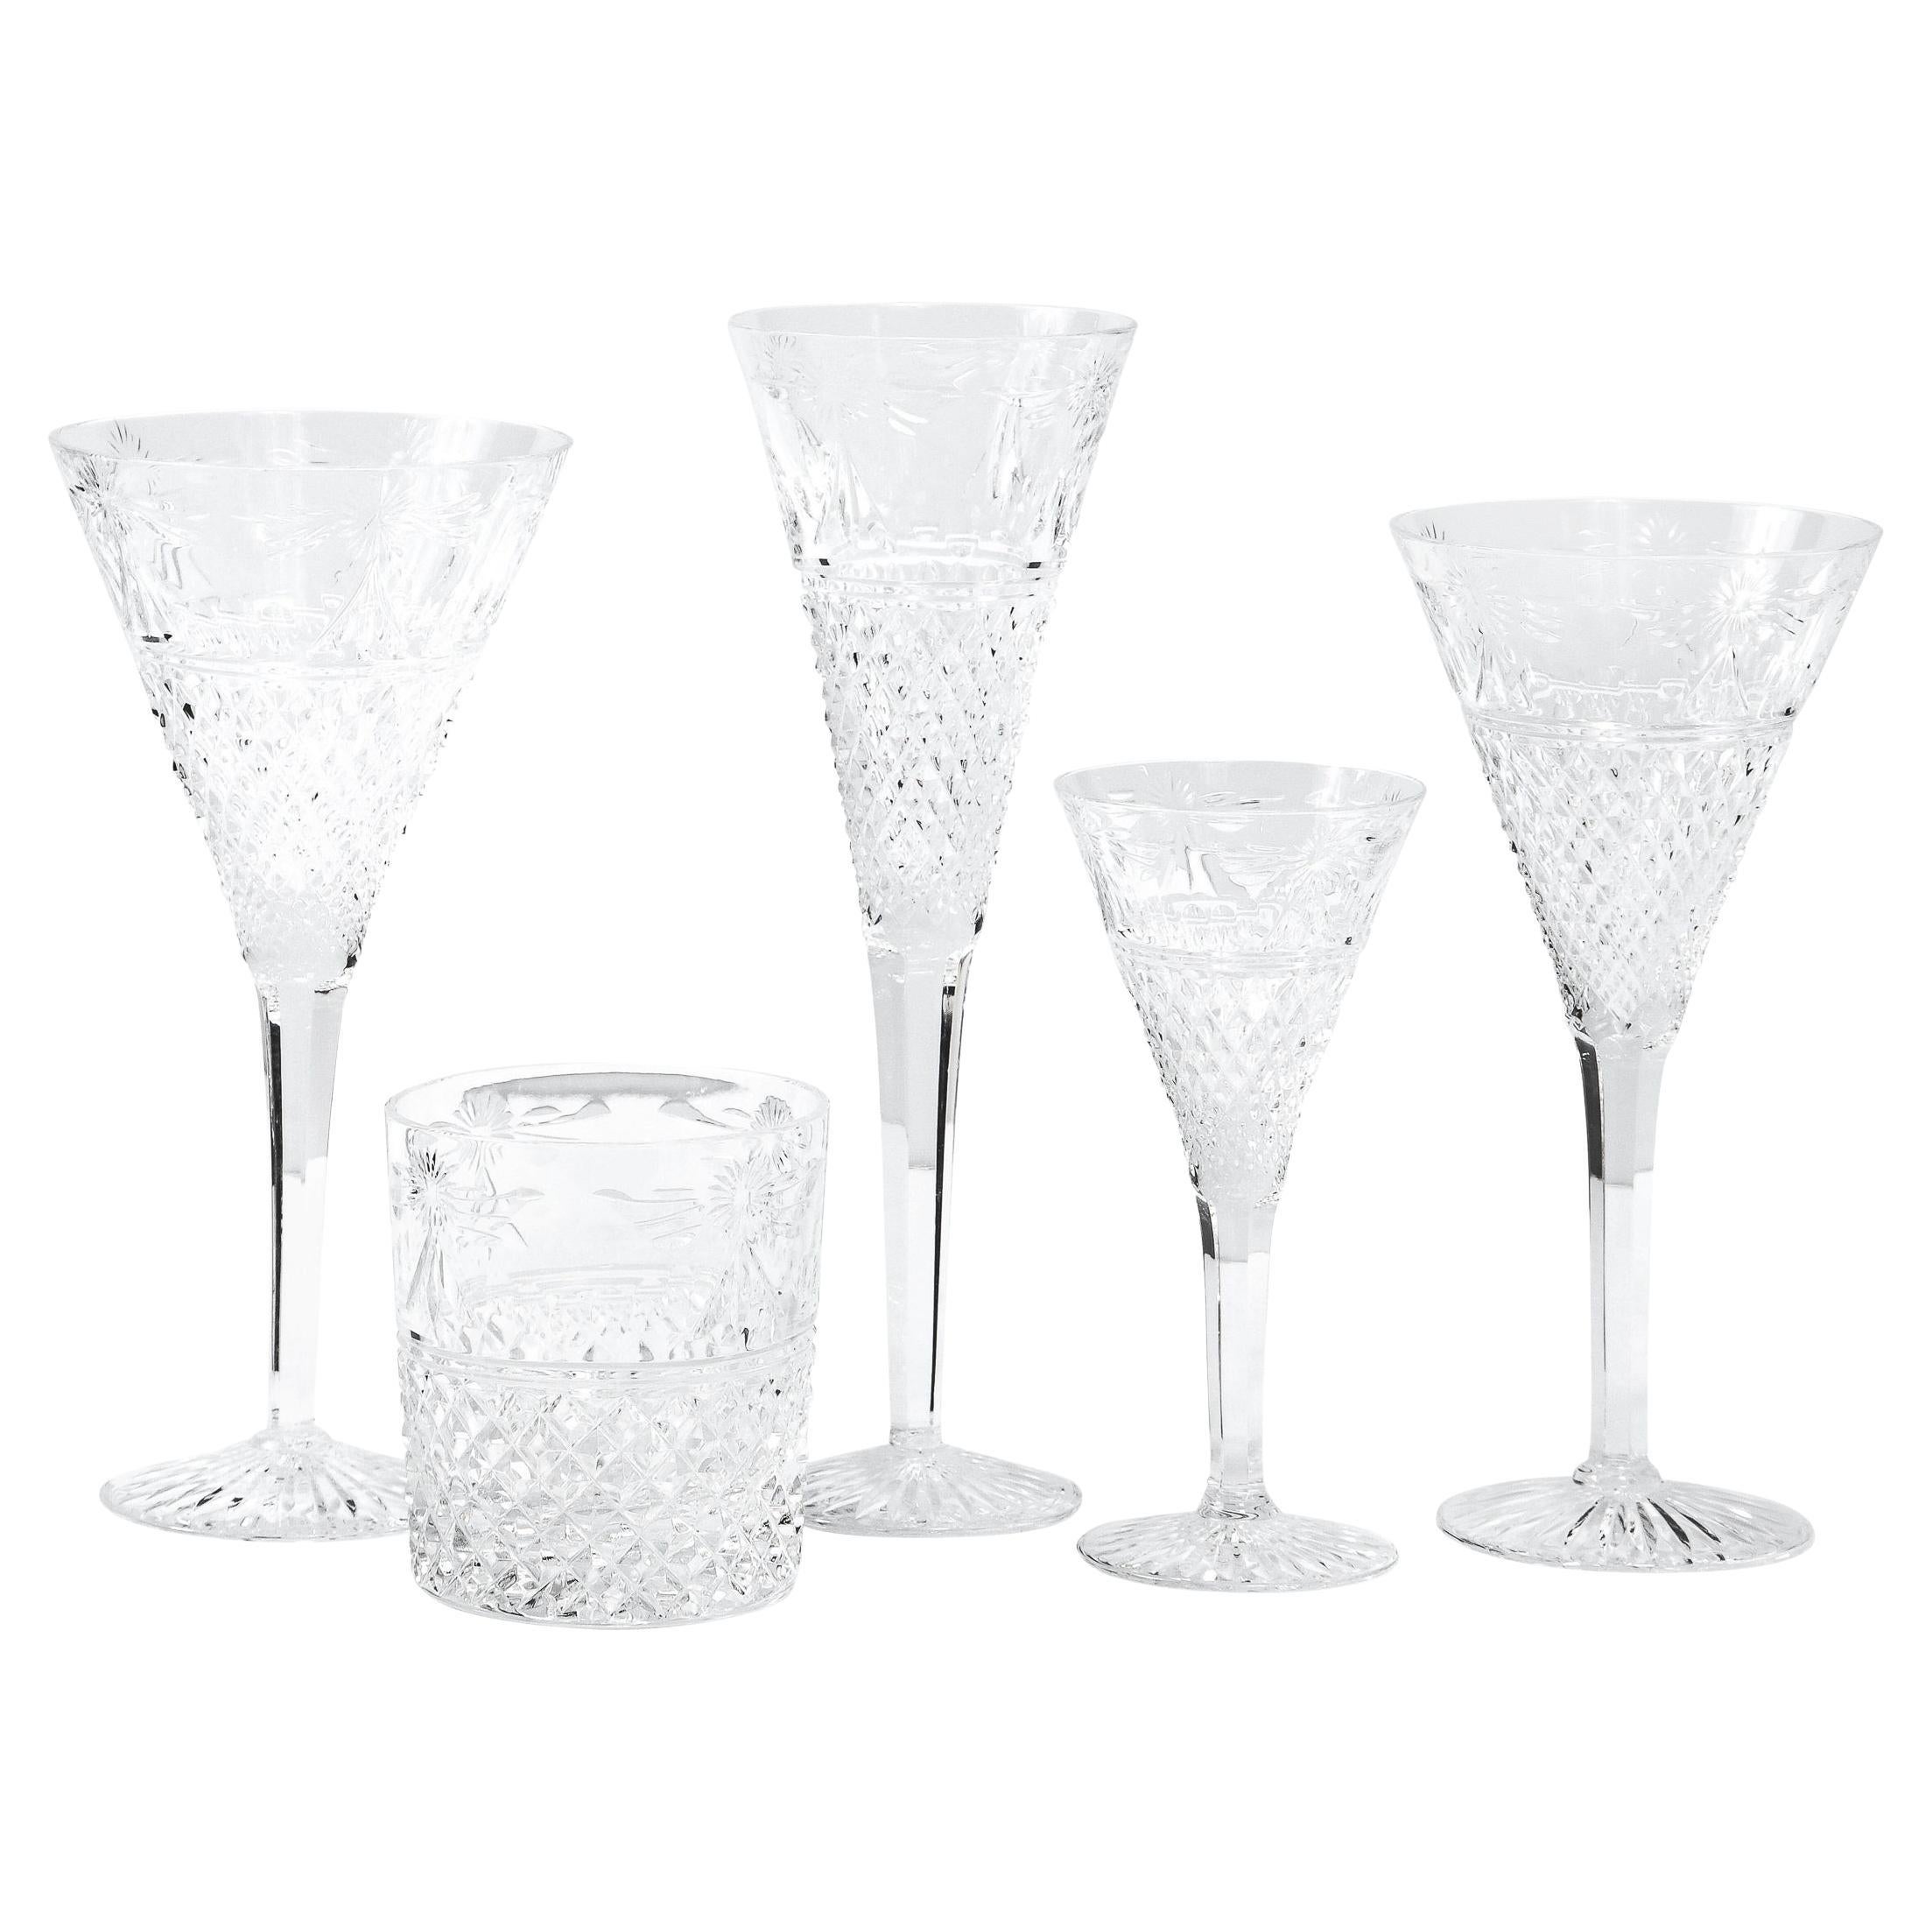 https://a.1stdibscdn.com/set-of-60-modernist-etched-crystal-glasses-by-stuart-with-neoclassical-detailing-for-sale/f_7934/f_272706221644251061690/f_27270622_1644251062356_bg_processed.jpg